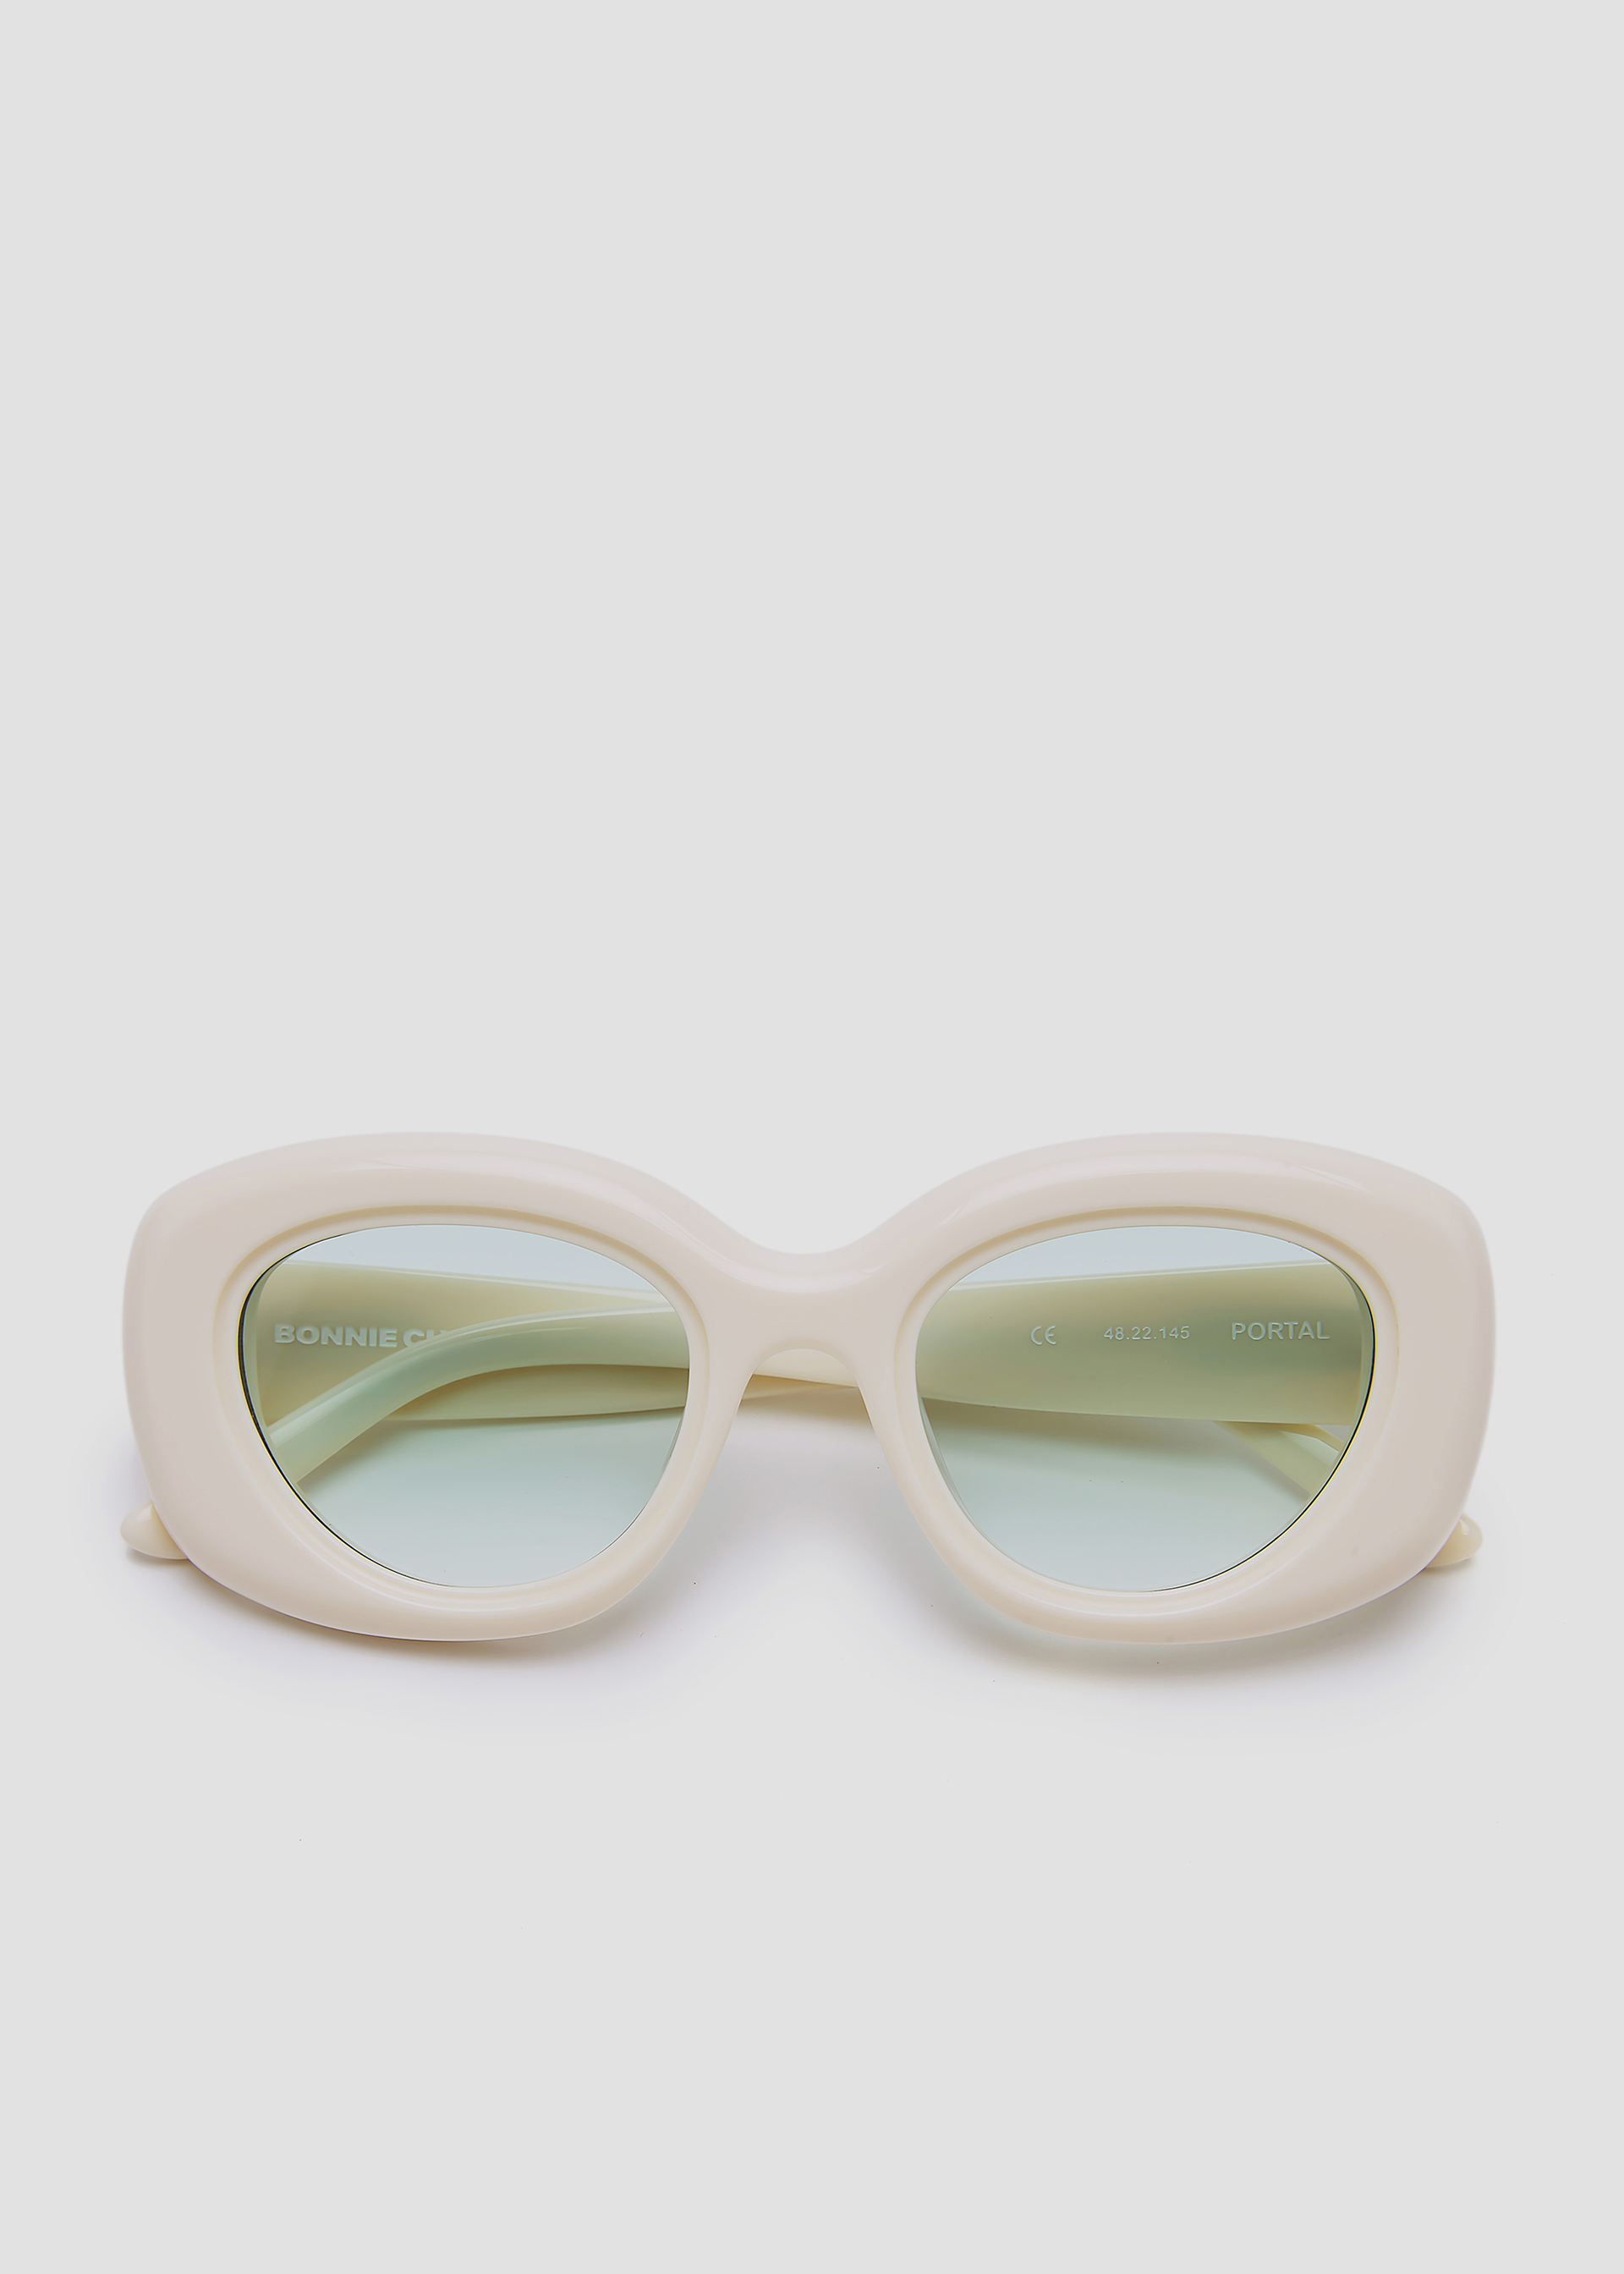 off white sunglasses on face